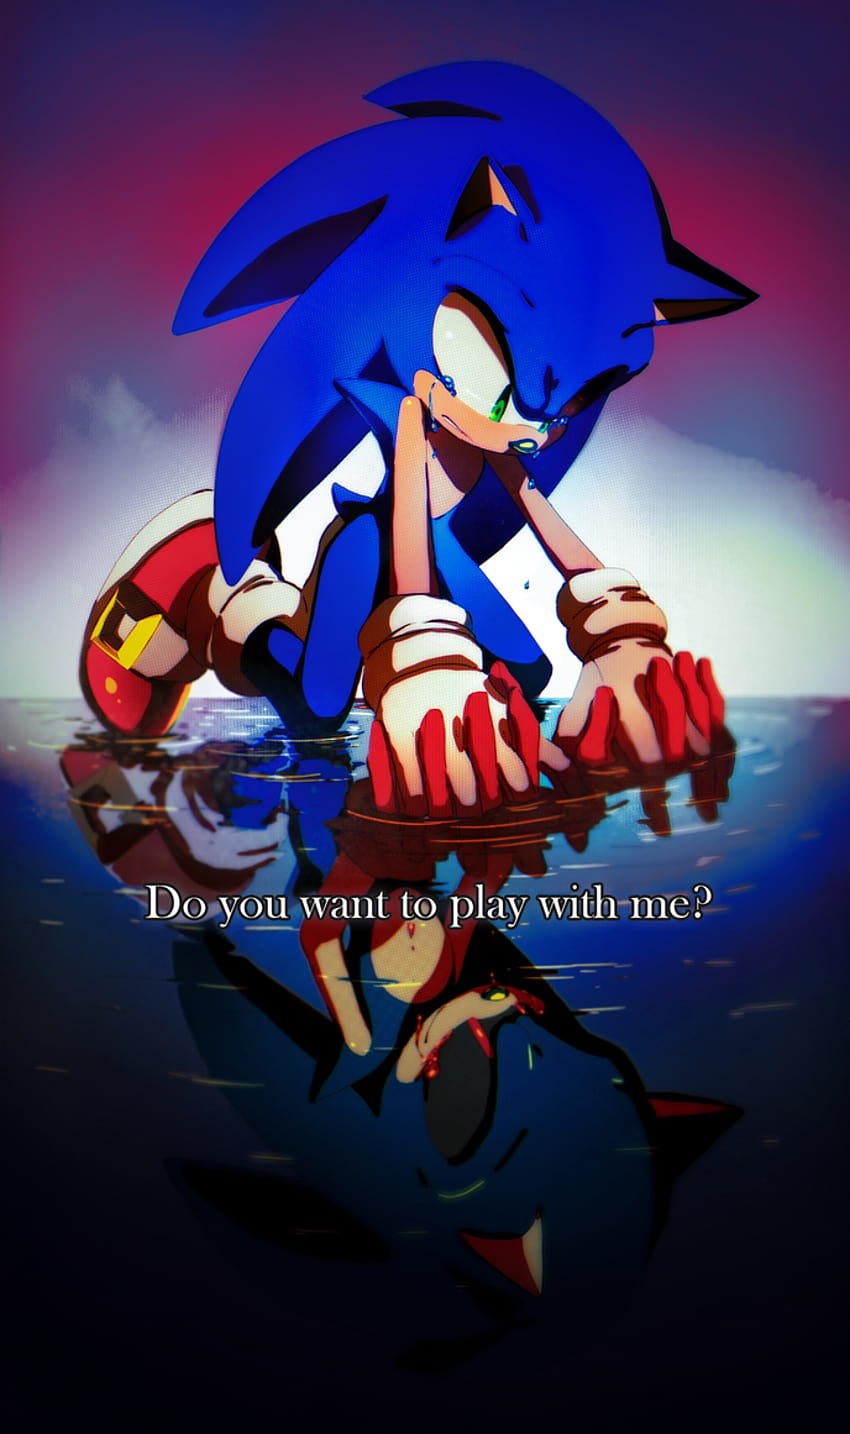 BEST SONIC.EXE GAME?